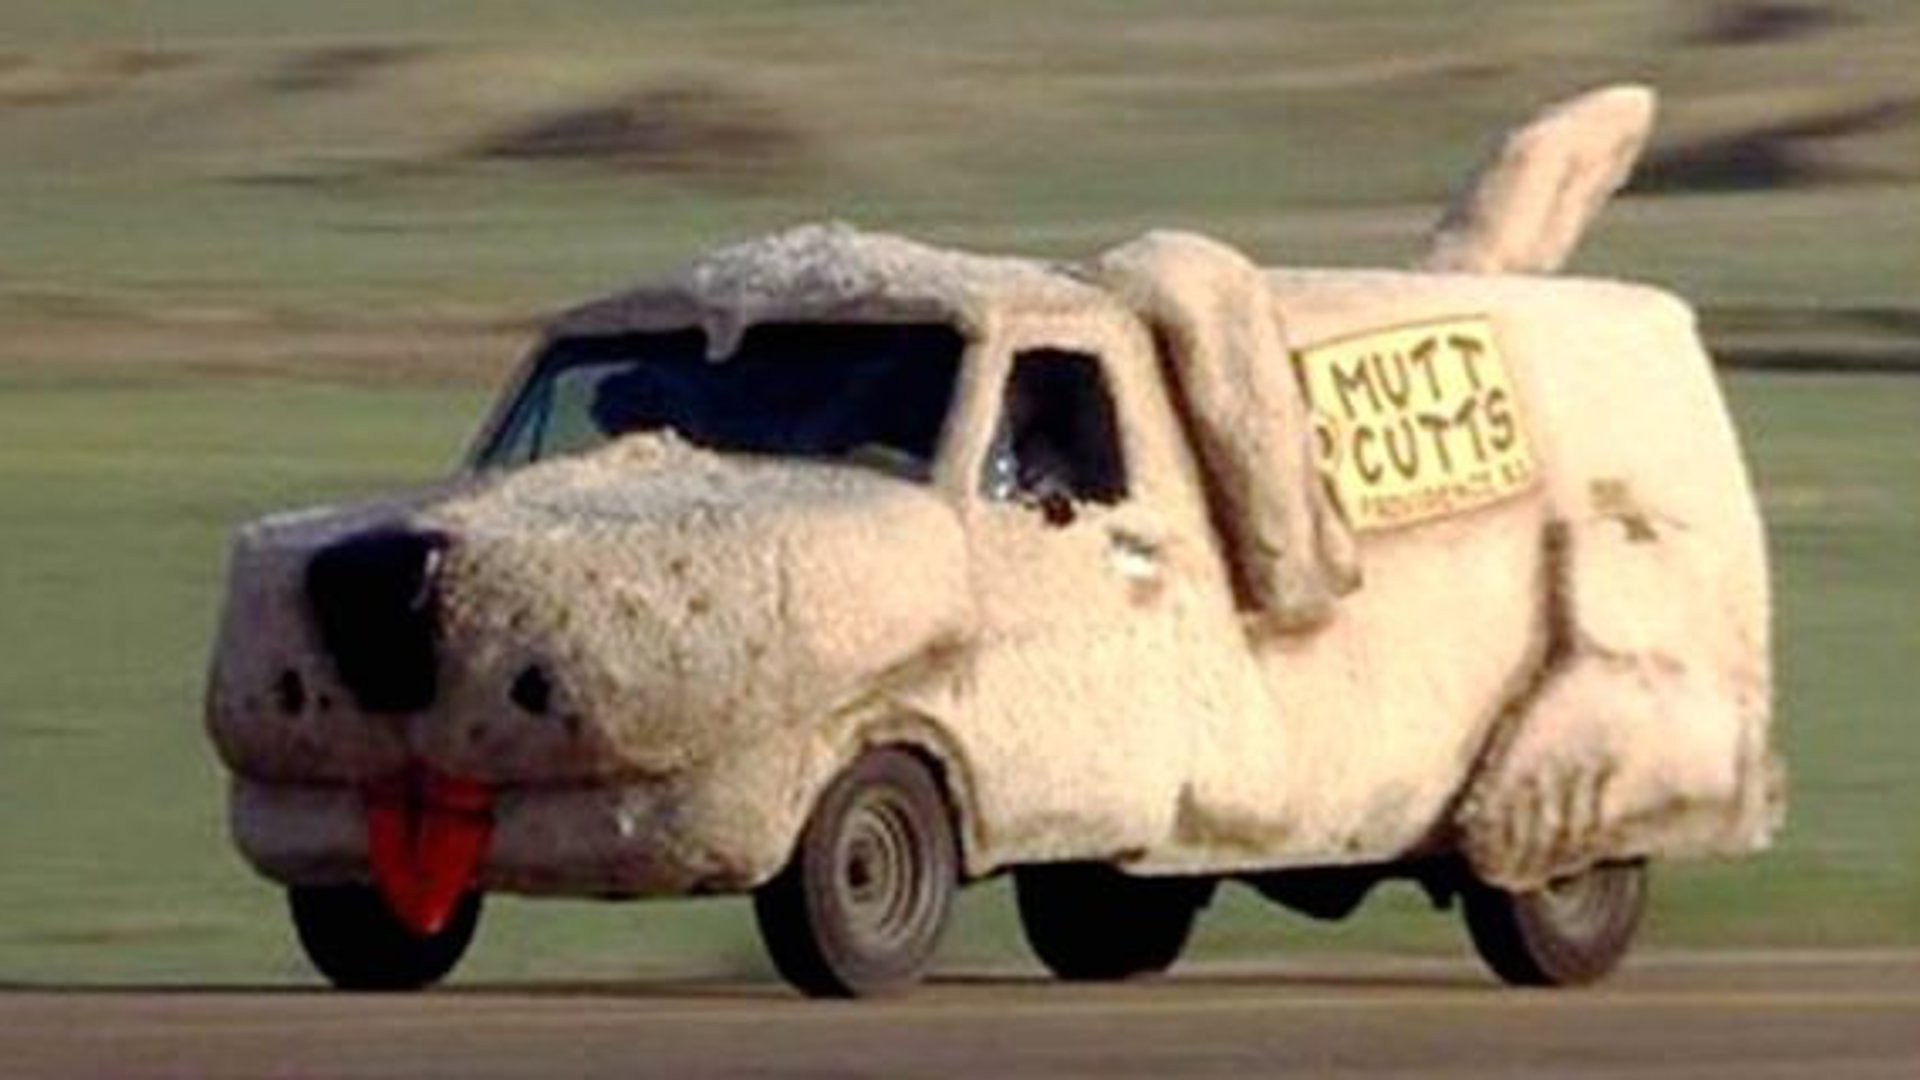 A Ford Econoline only in name (also known as an “’84 Sheepdog”), Harry’s famous company car should be a shoe-in for Hot Wheels lore.<br /><br><br><br />Not only is this the most famous car from the film (except maybe the Lamborghini Diablo they manage to procure thanks to a briefcase loaded with cash), it could very well be the most famous vehicle from the comedy genre, this side of the Wagon Queen Family Truckster.<br /><br><br><br />Question is, would Mattel pony up the dough to add floppy ears, a tongue and to finish the whole thing in fur?